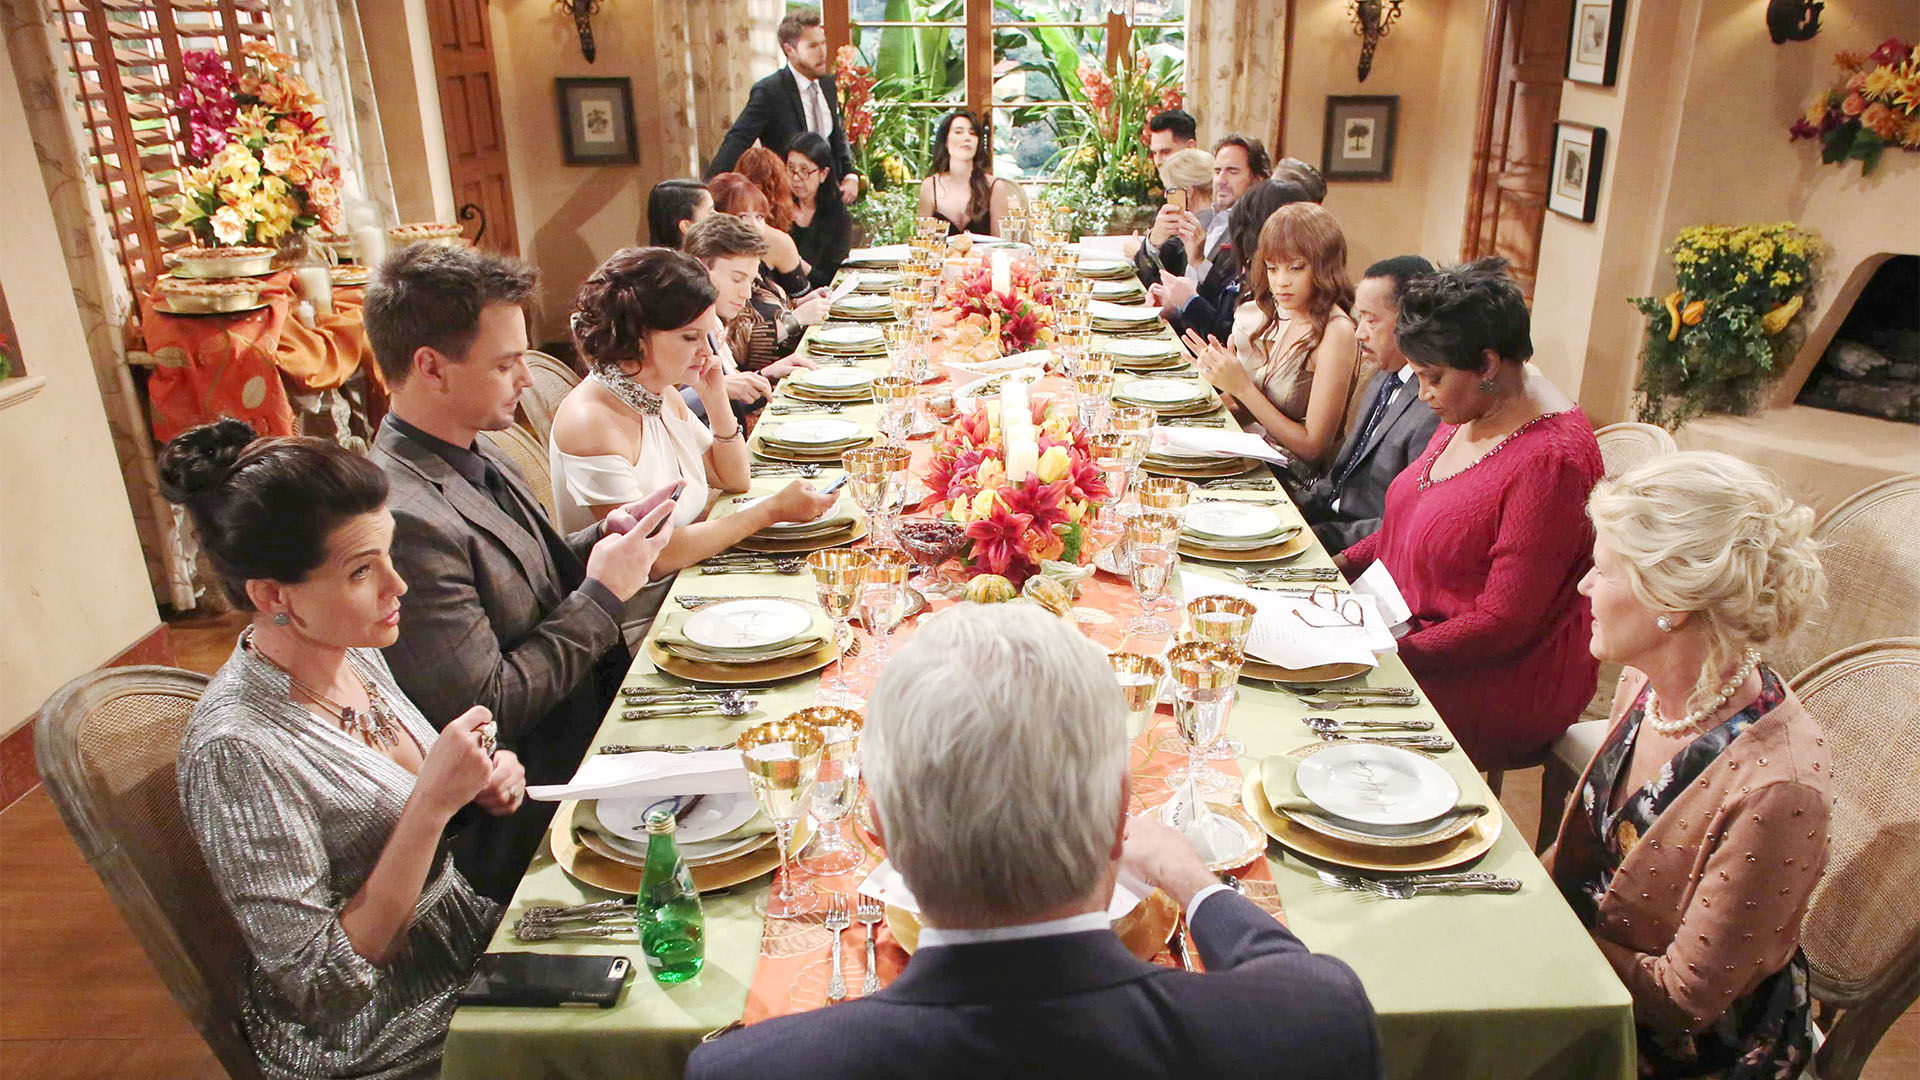 As is tradition, the Forrester, Logan, Spencer, Avant and Spectra families put their difference aside and join together for Thanksgiving and give gratitude.